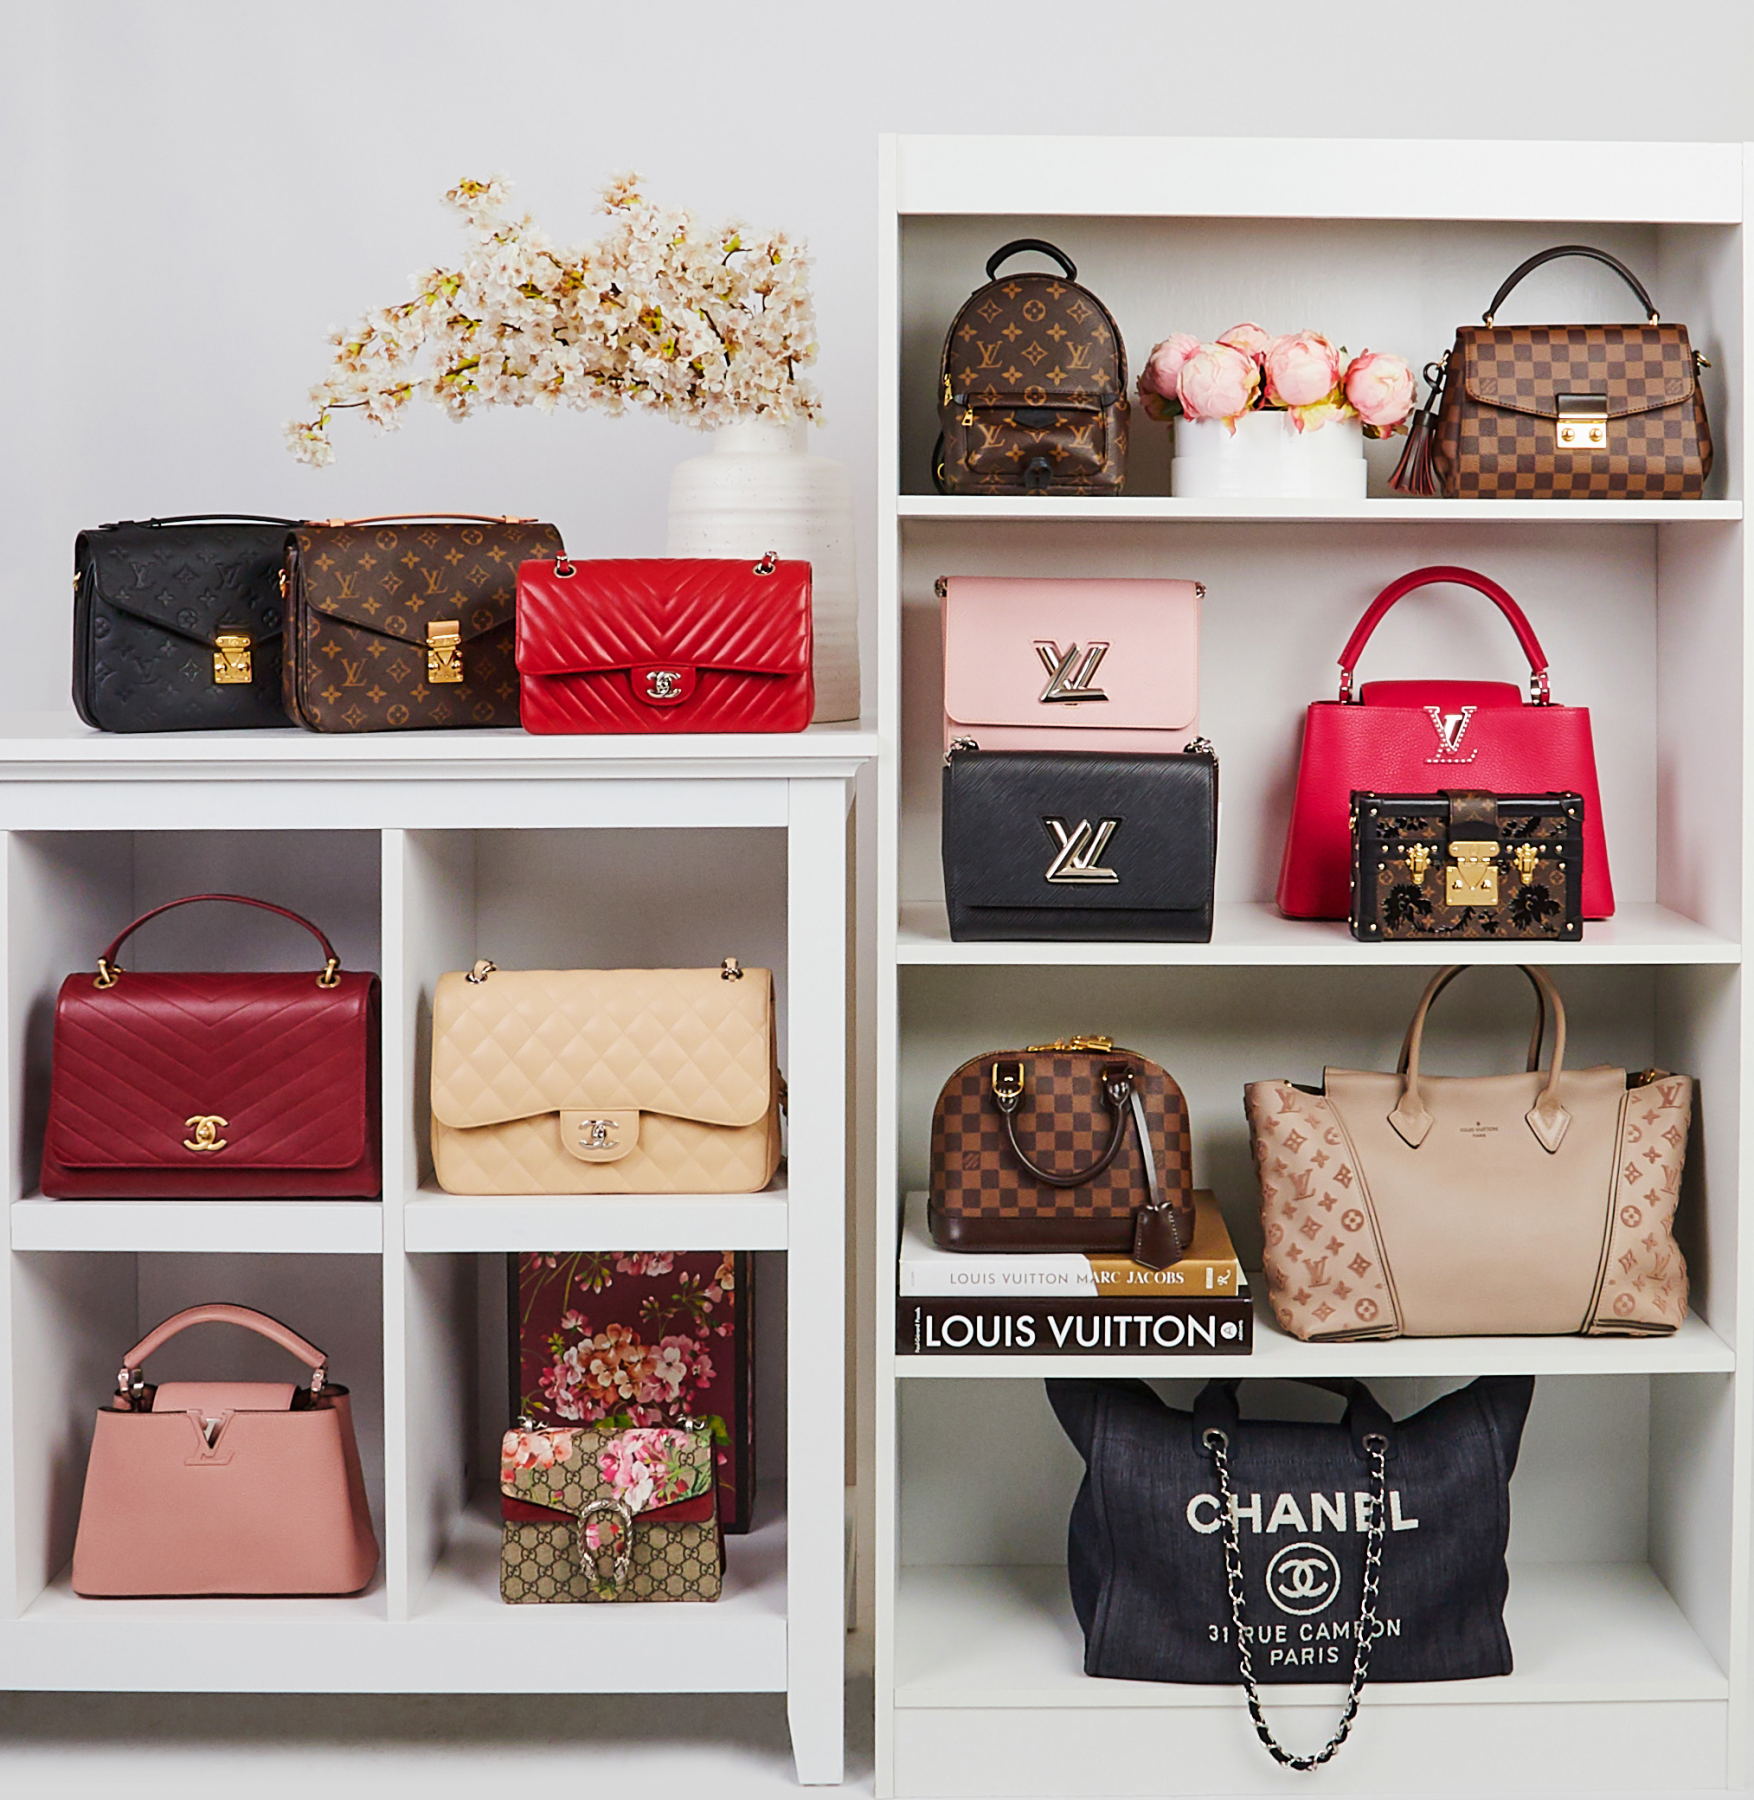 The real reason Louis Vuitton and Chanel are raising their prices